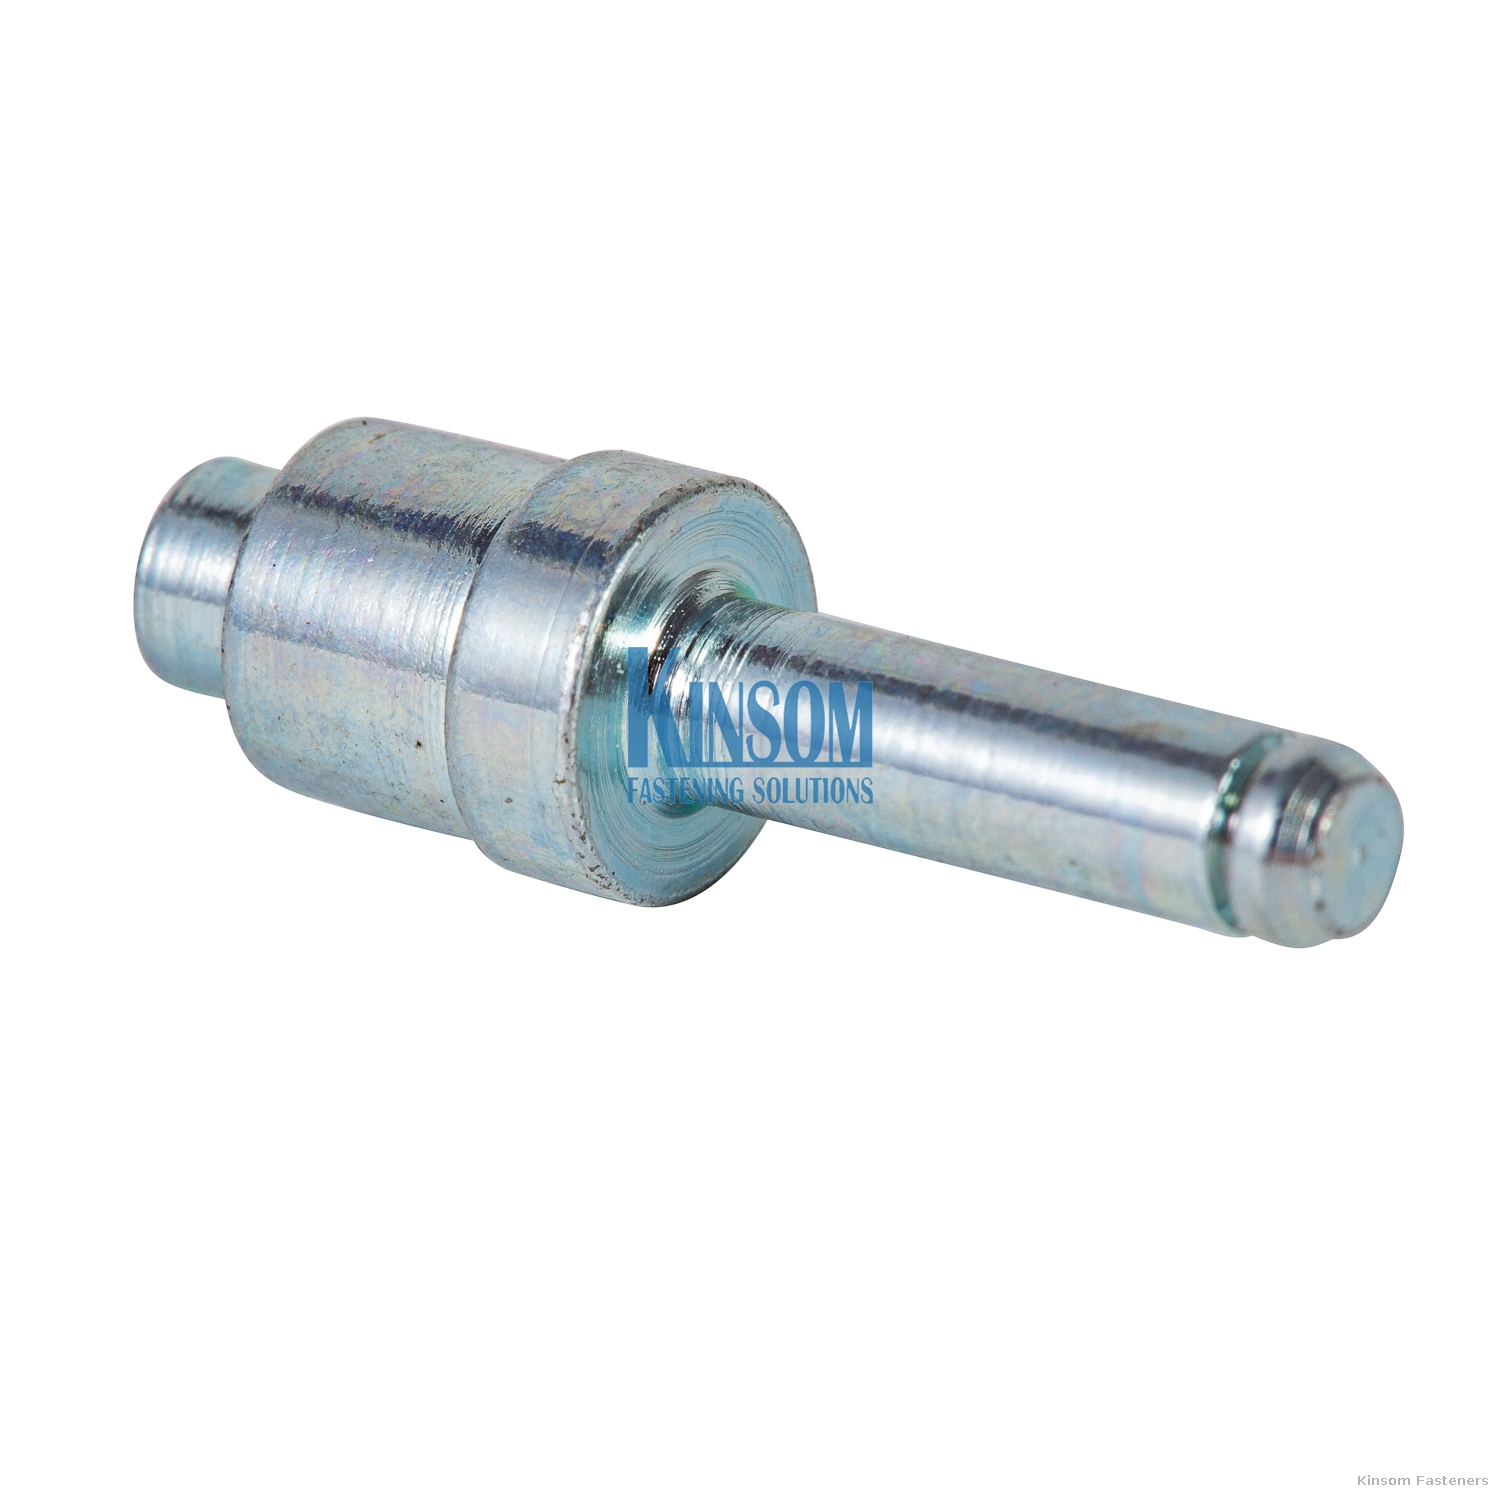 Rod stud solid rivet/Zinc clear trivalent passivate 240hours NSS tested/studs riveting steel industry fasteners